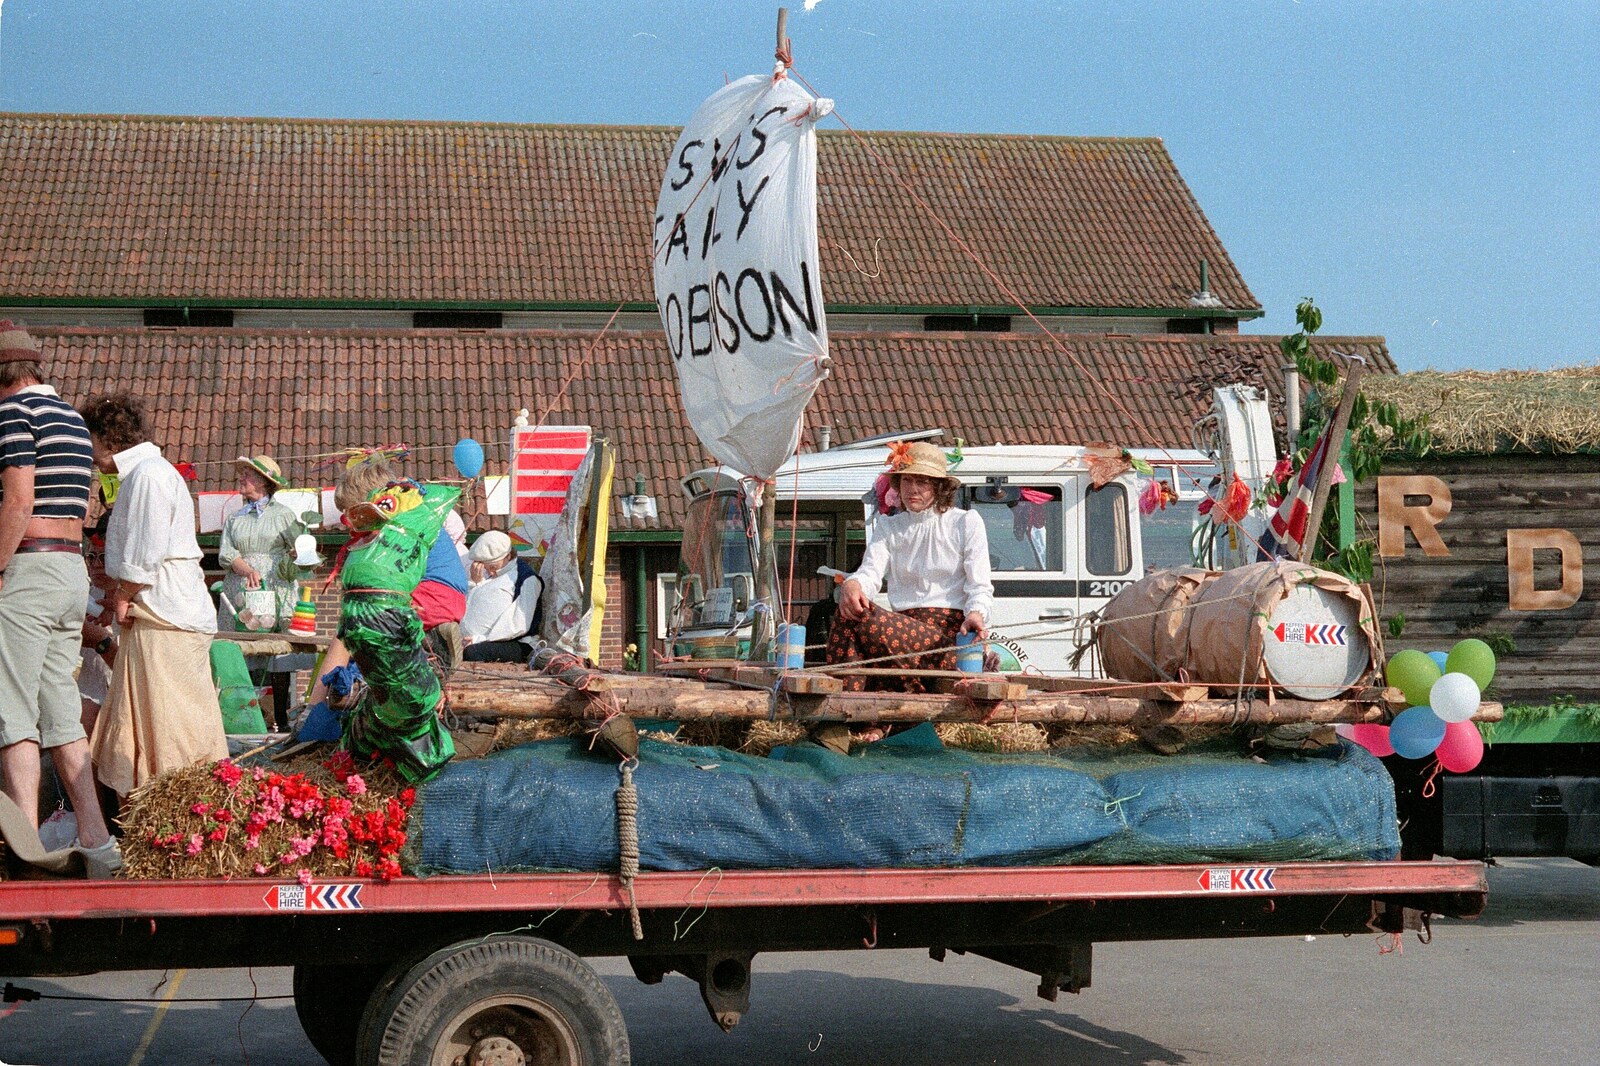 The Swiss Family Robinson from Sean and the New Milton Carnival, Hampshire - 1st August 1986